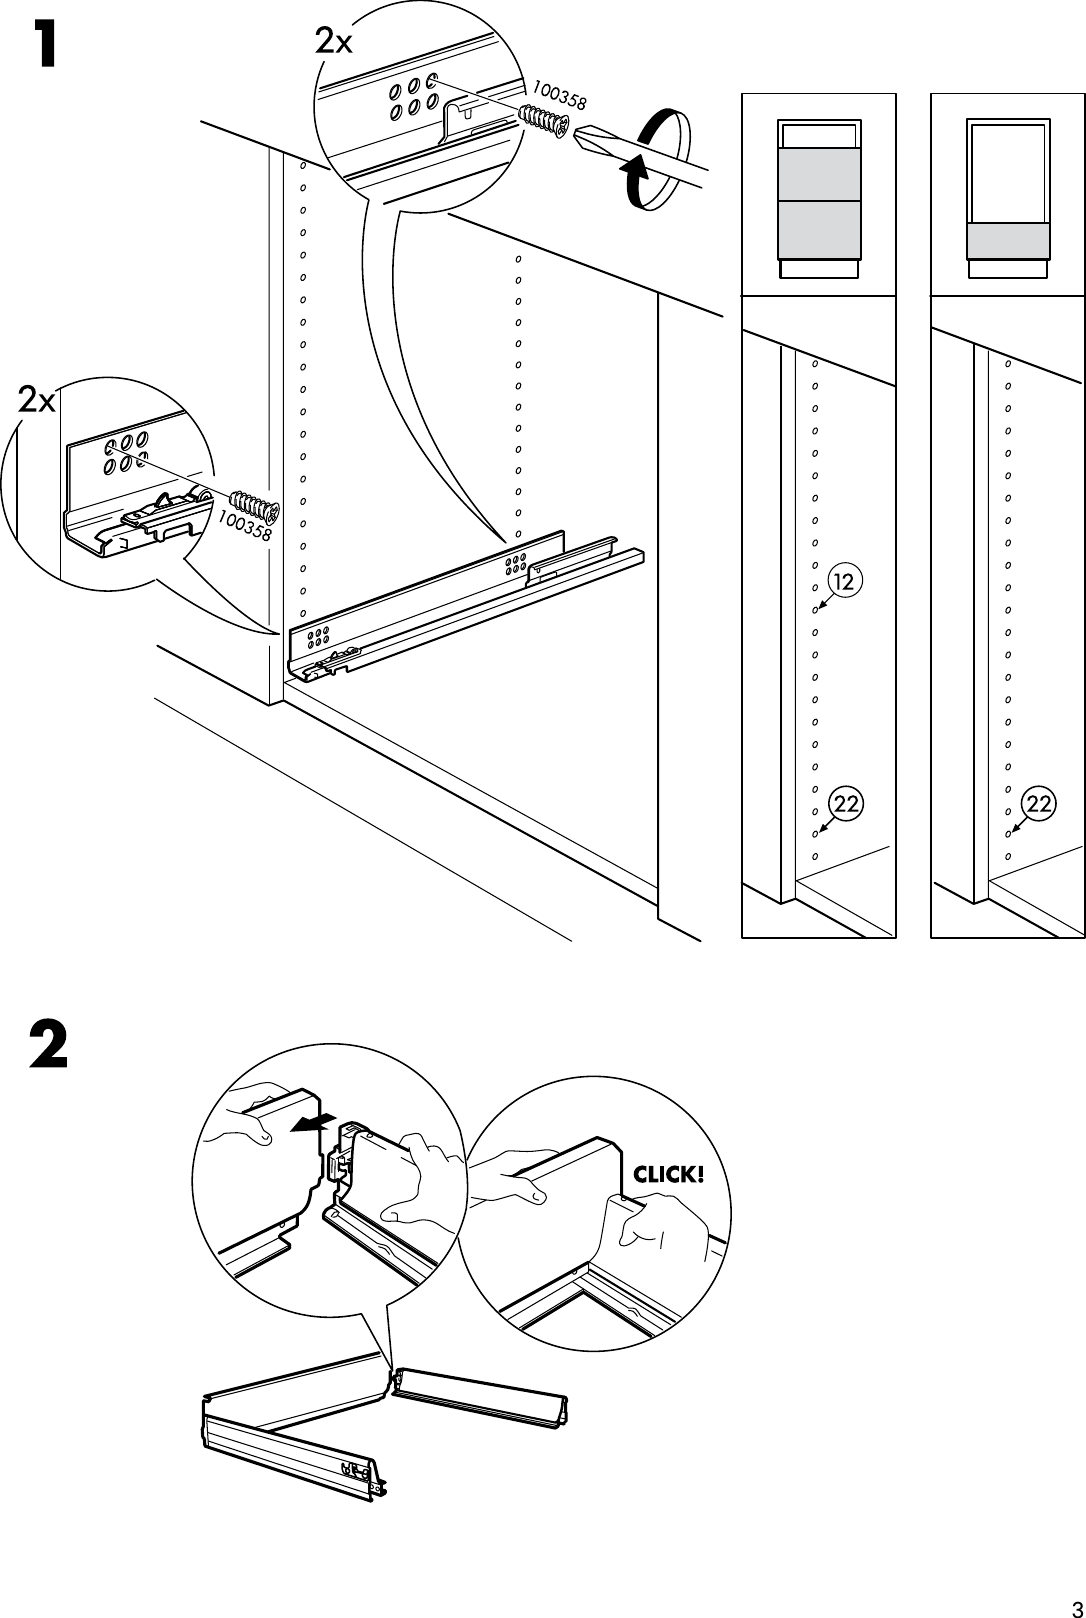 Page 3 of 8 - Ikea Ikea-Rationell-Deep-Full-Extending-Drawer-15-Assembly-Instruction